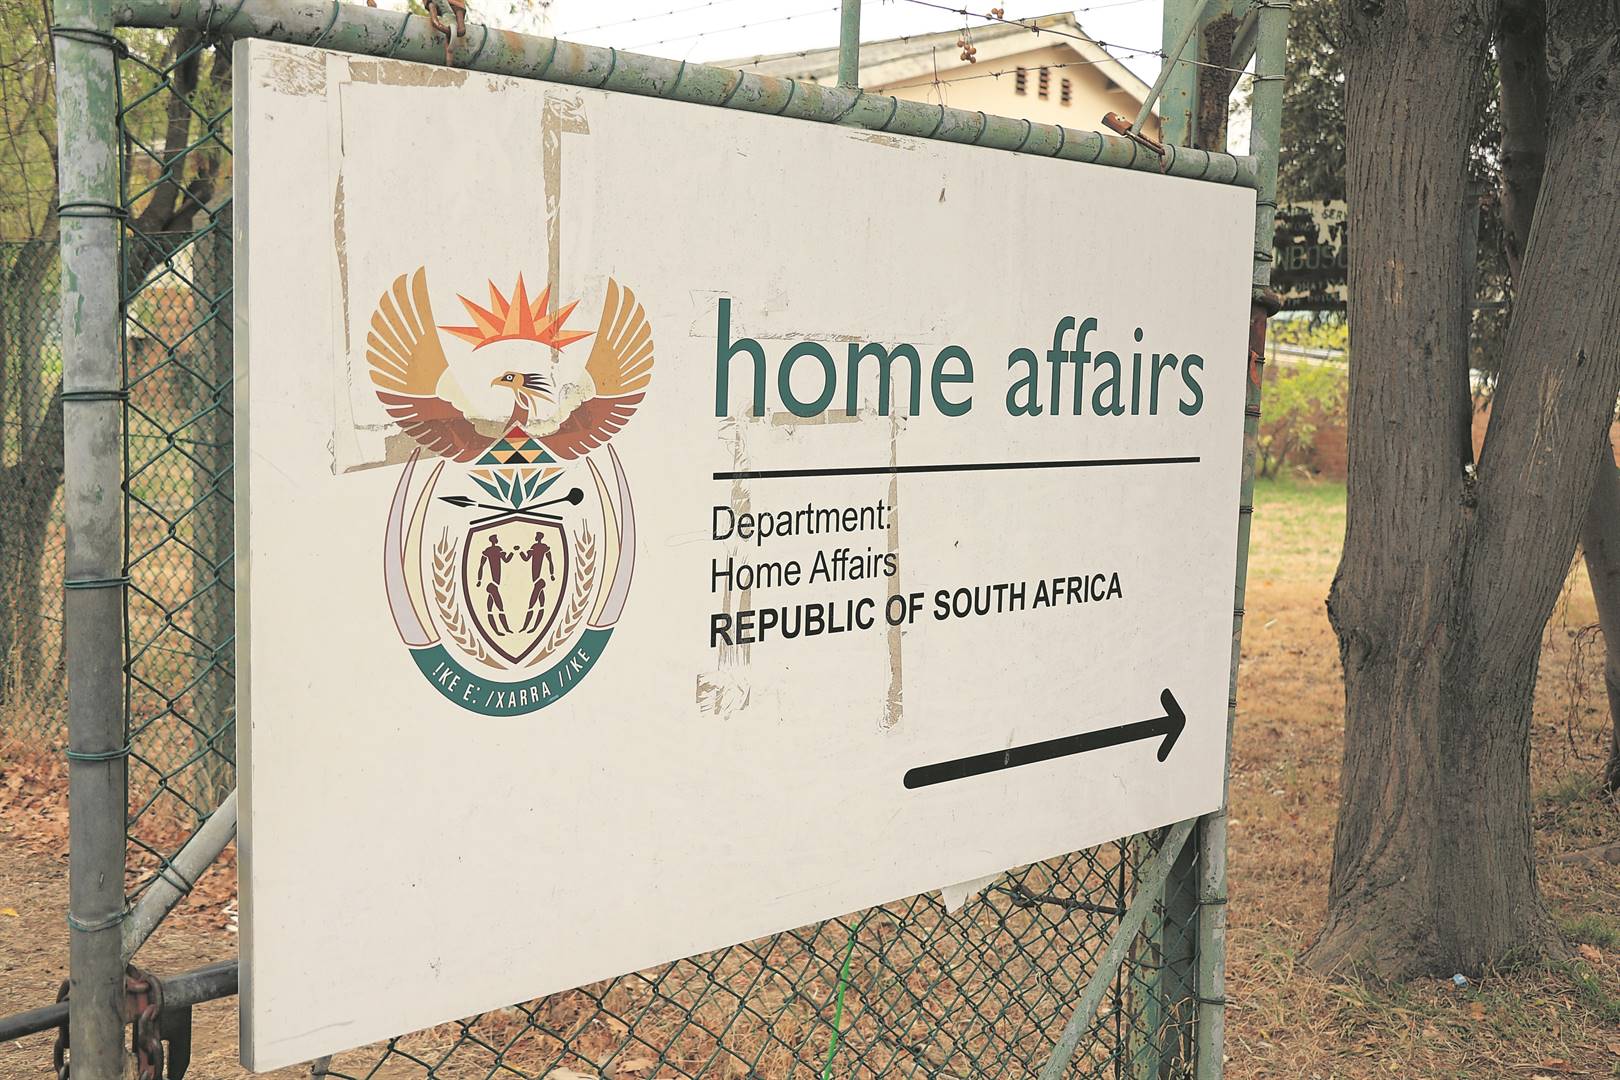 The department of home affairs has launched an investigation into one of its KwaZulu-Natal branches.